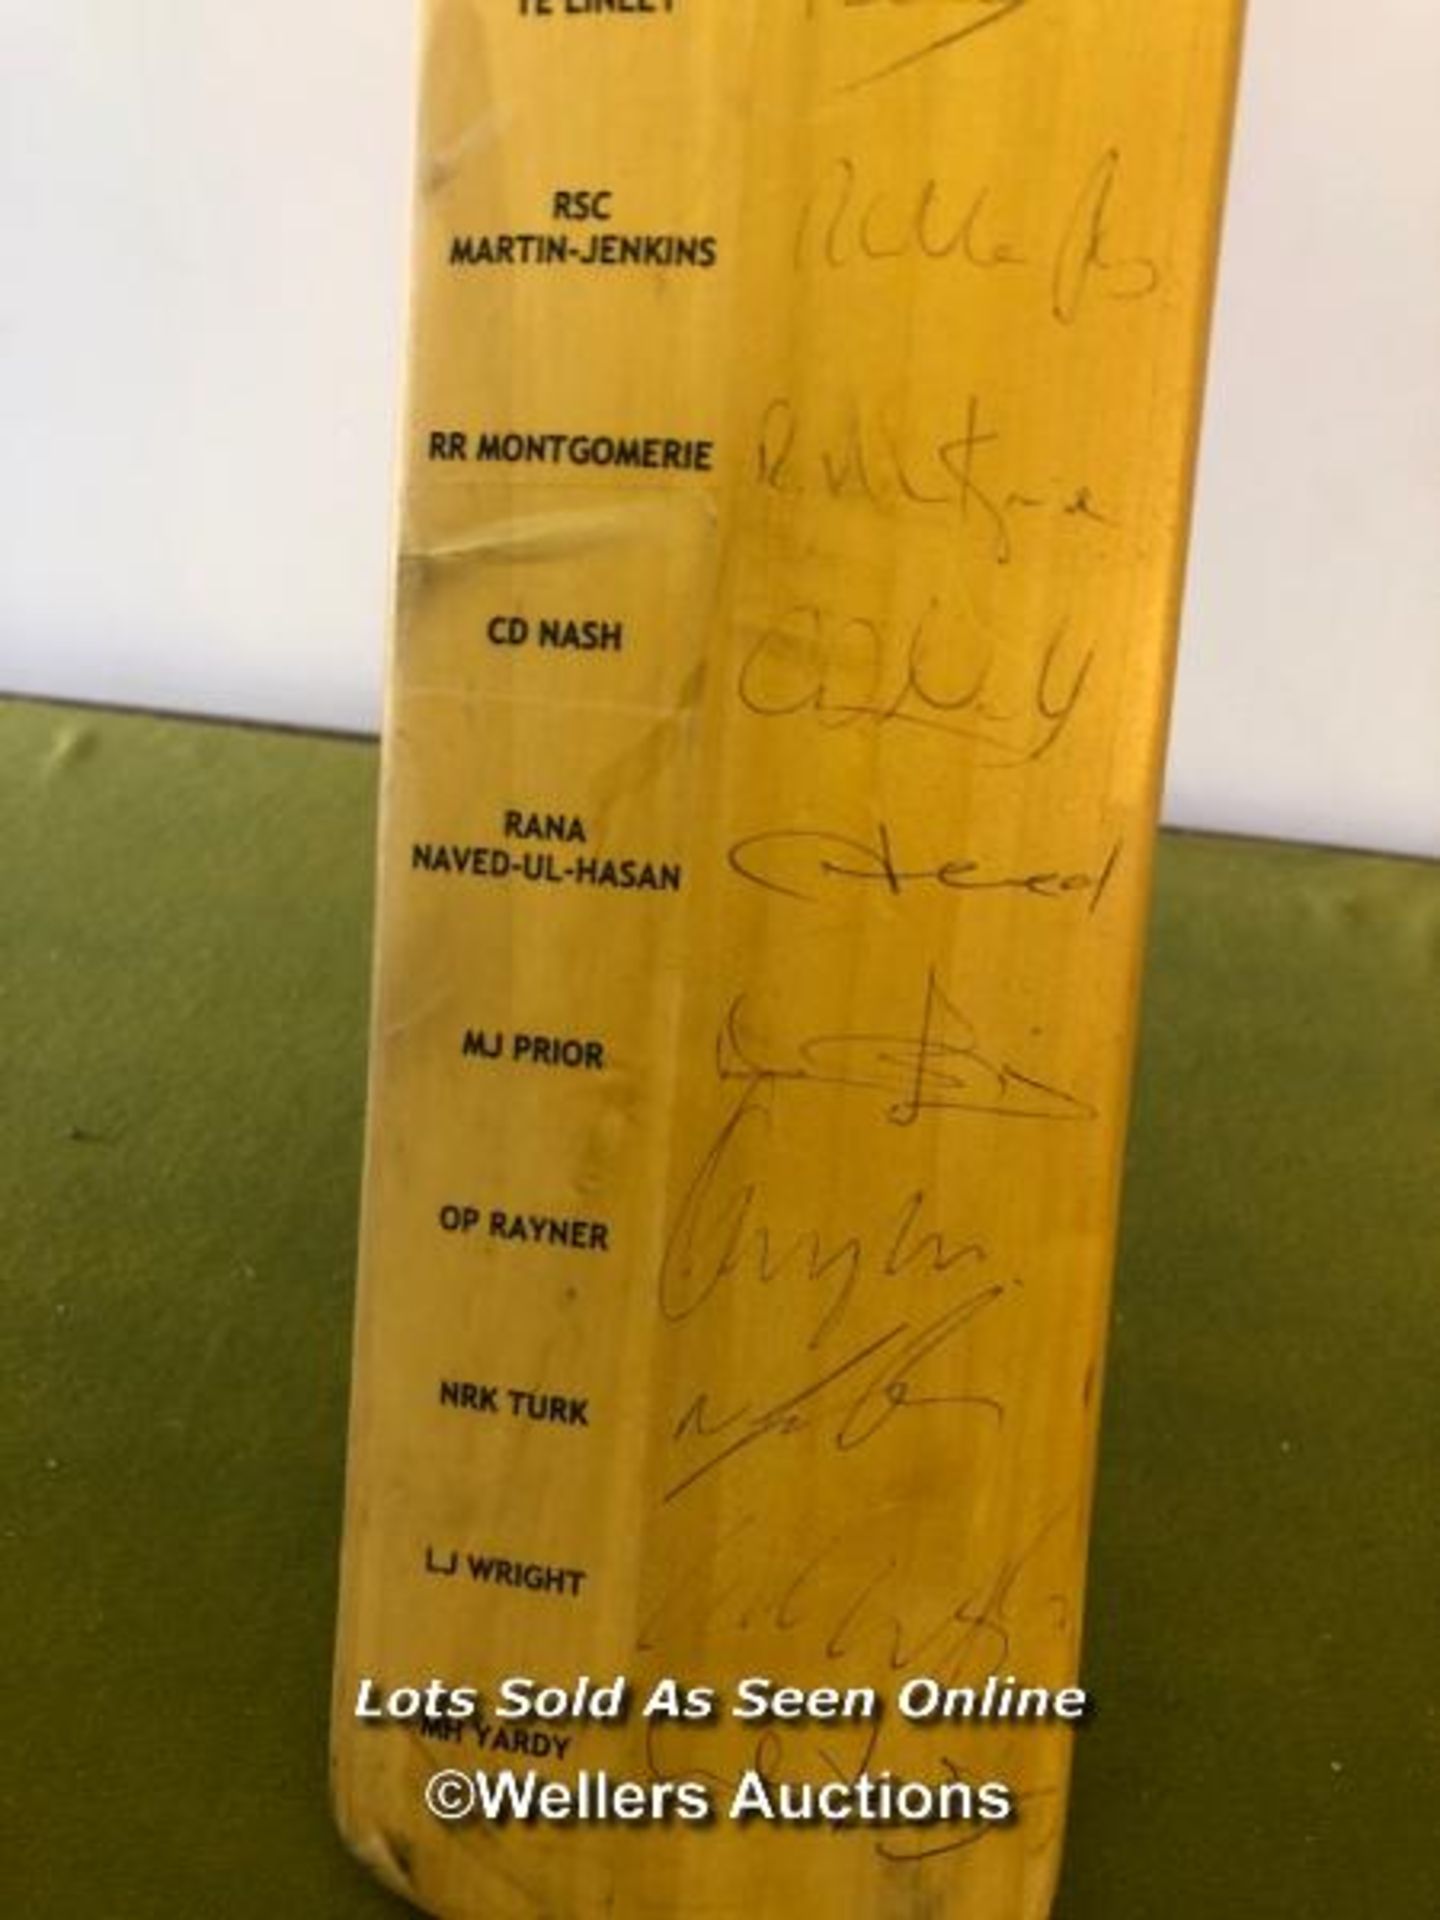 CRICKET BAT SIGNED BY THE SUSSEX CCC 2006, INCLUDING MATT PRIOR'S SIGNATURE - Image 3 of 4